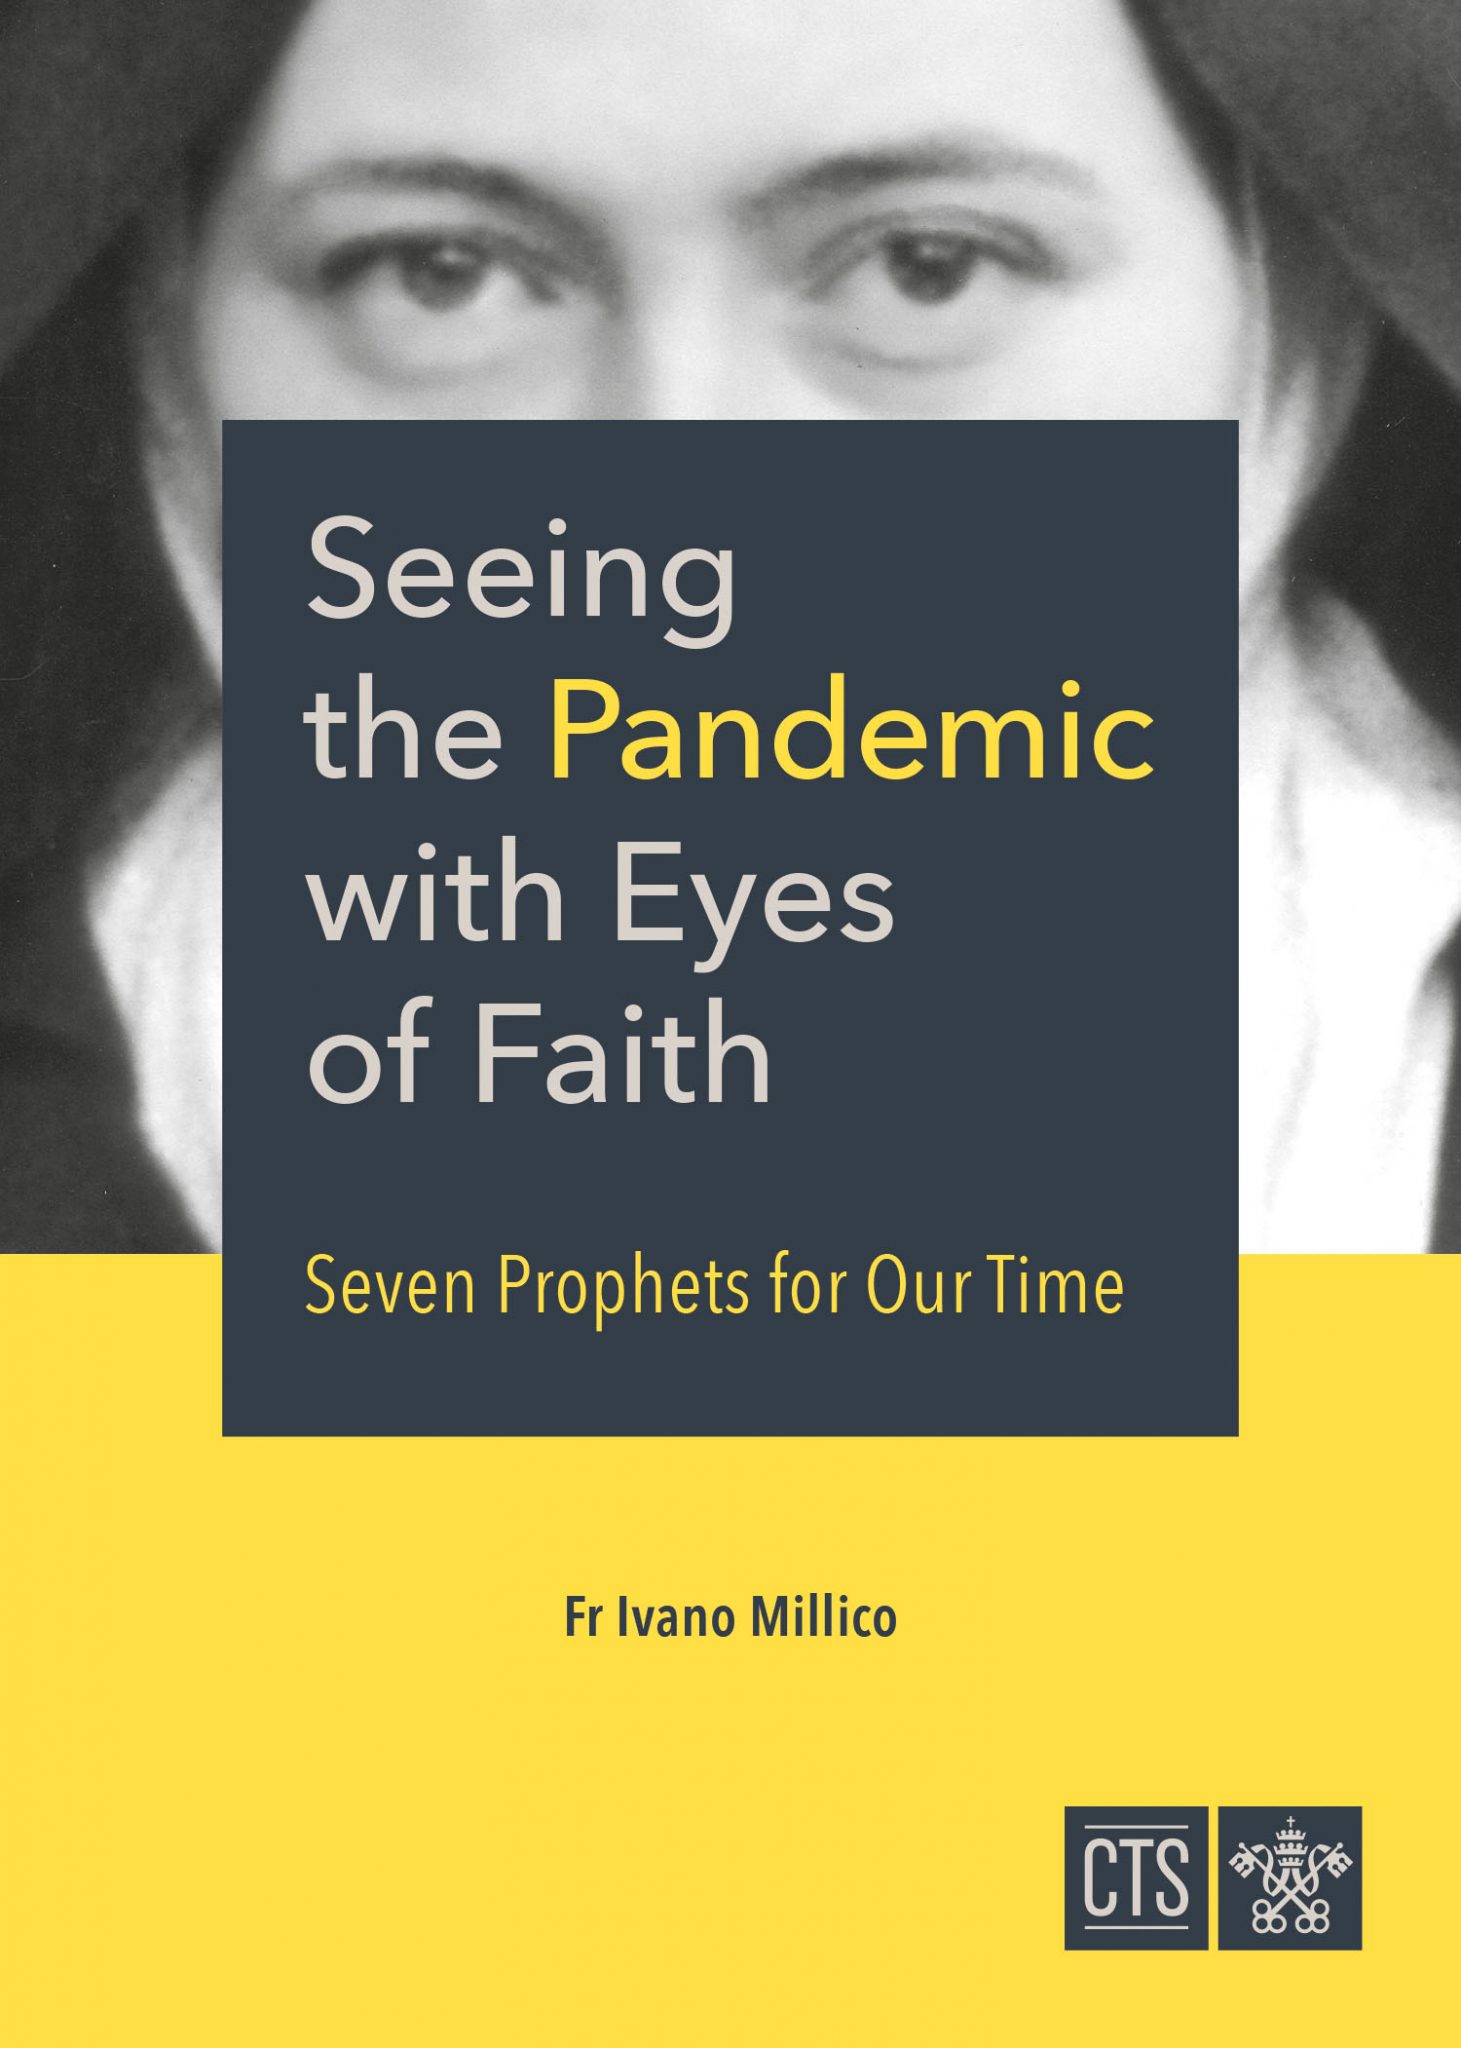 essay about faith in pandemic